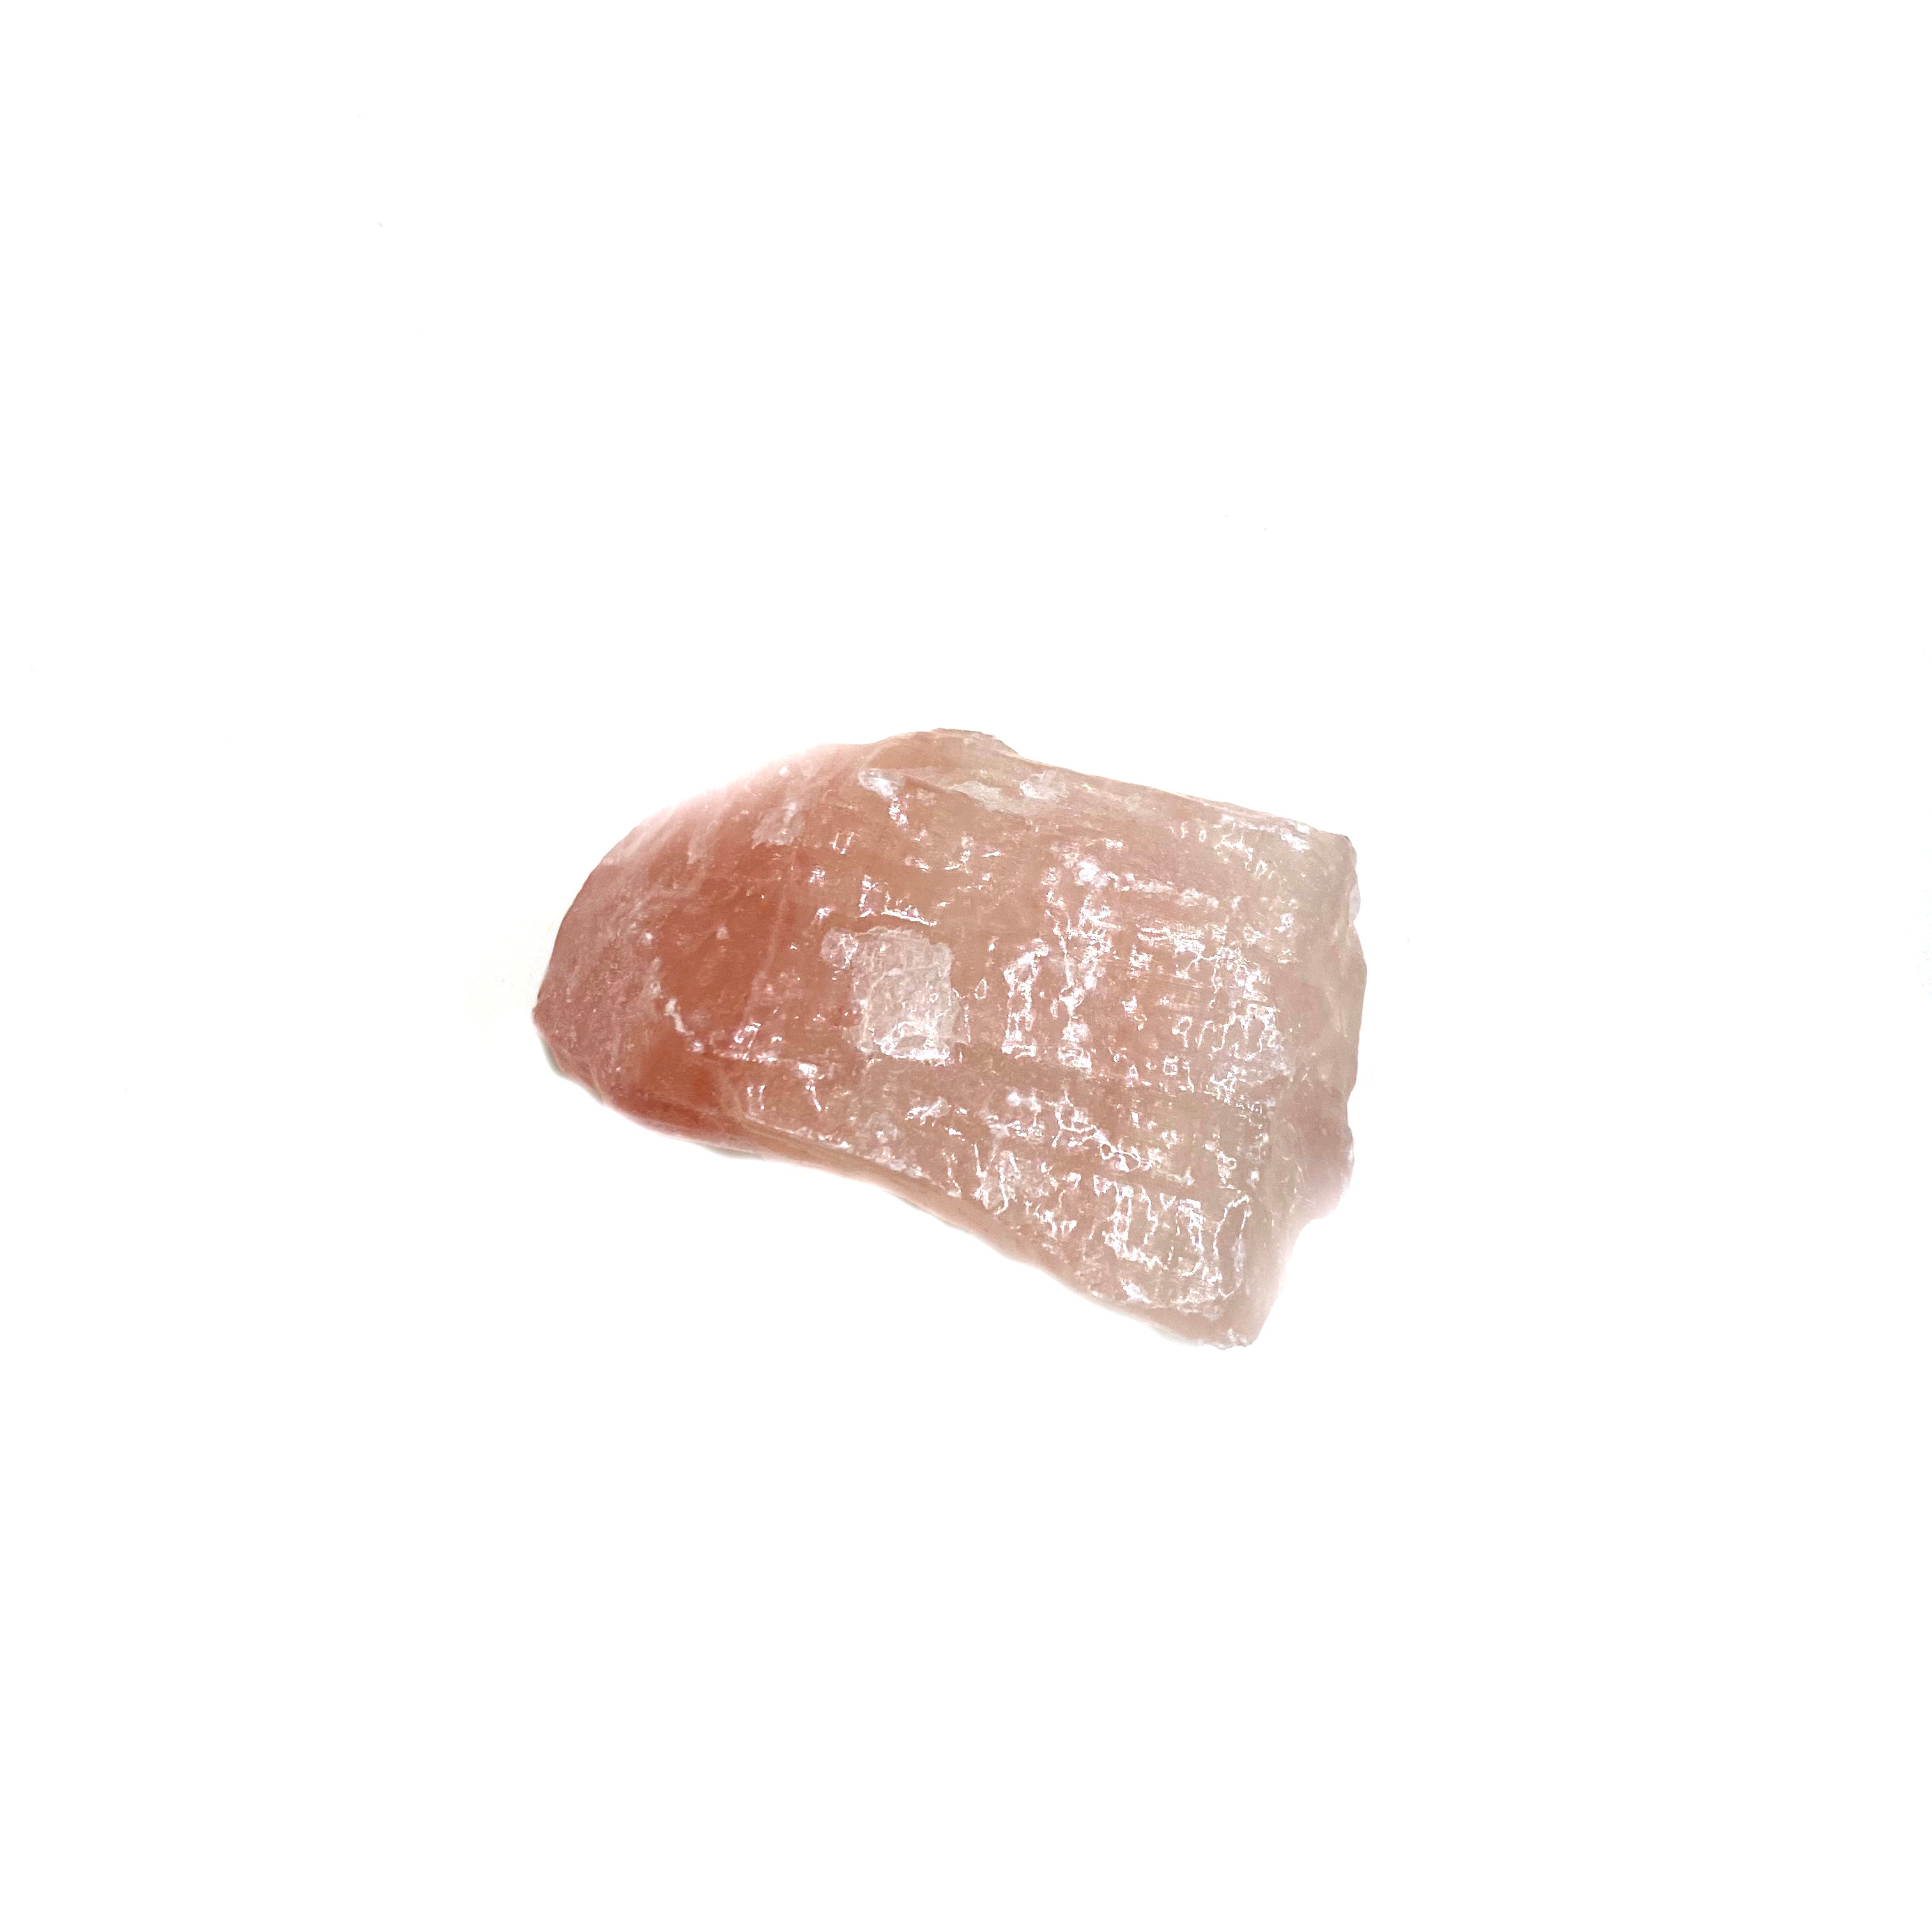 Polished Pink Calcite